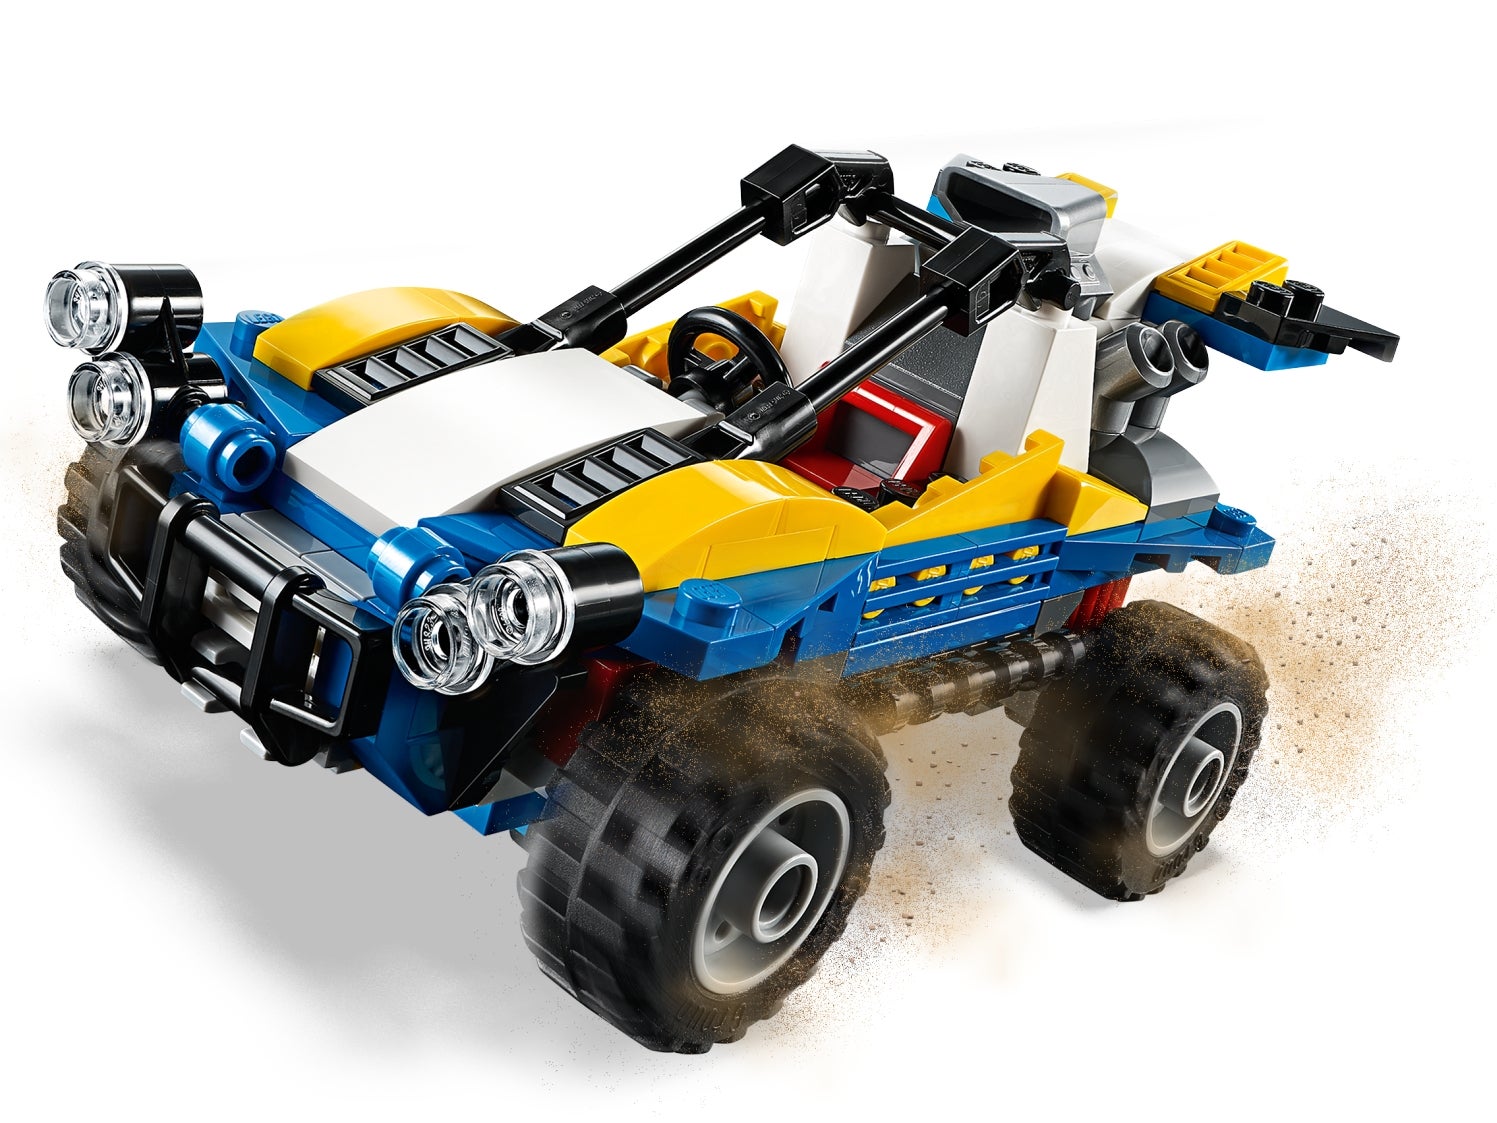 Airplane Lego 31087 Creator 3 in 1 Dune Buggy & Quad bike.147 pieces ~ NEW ~